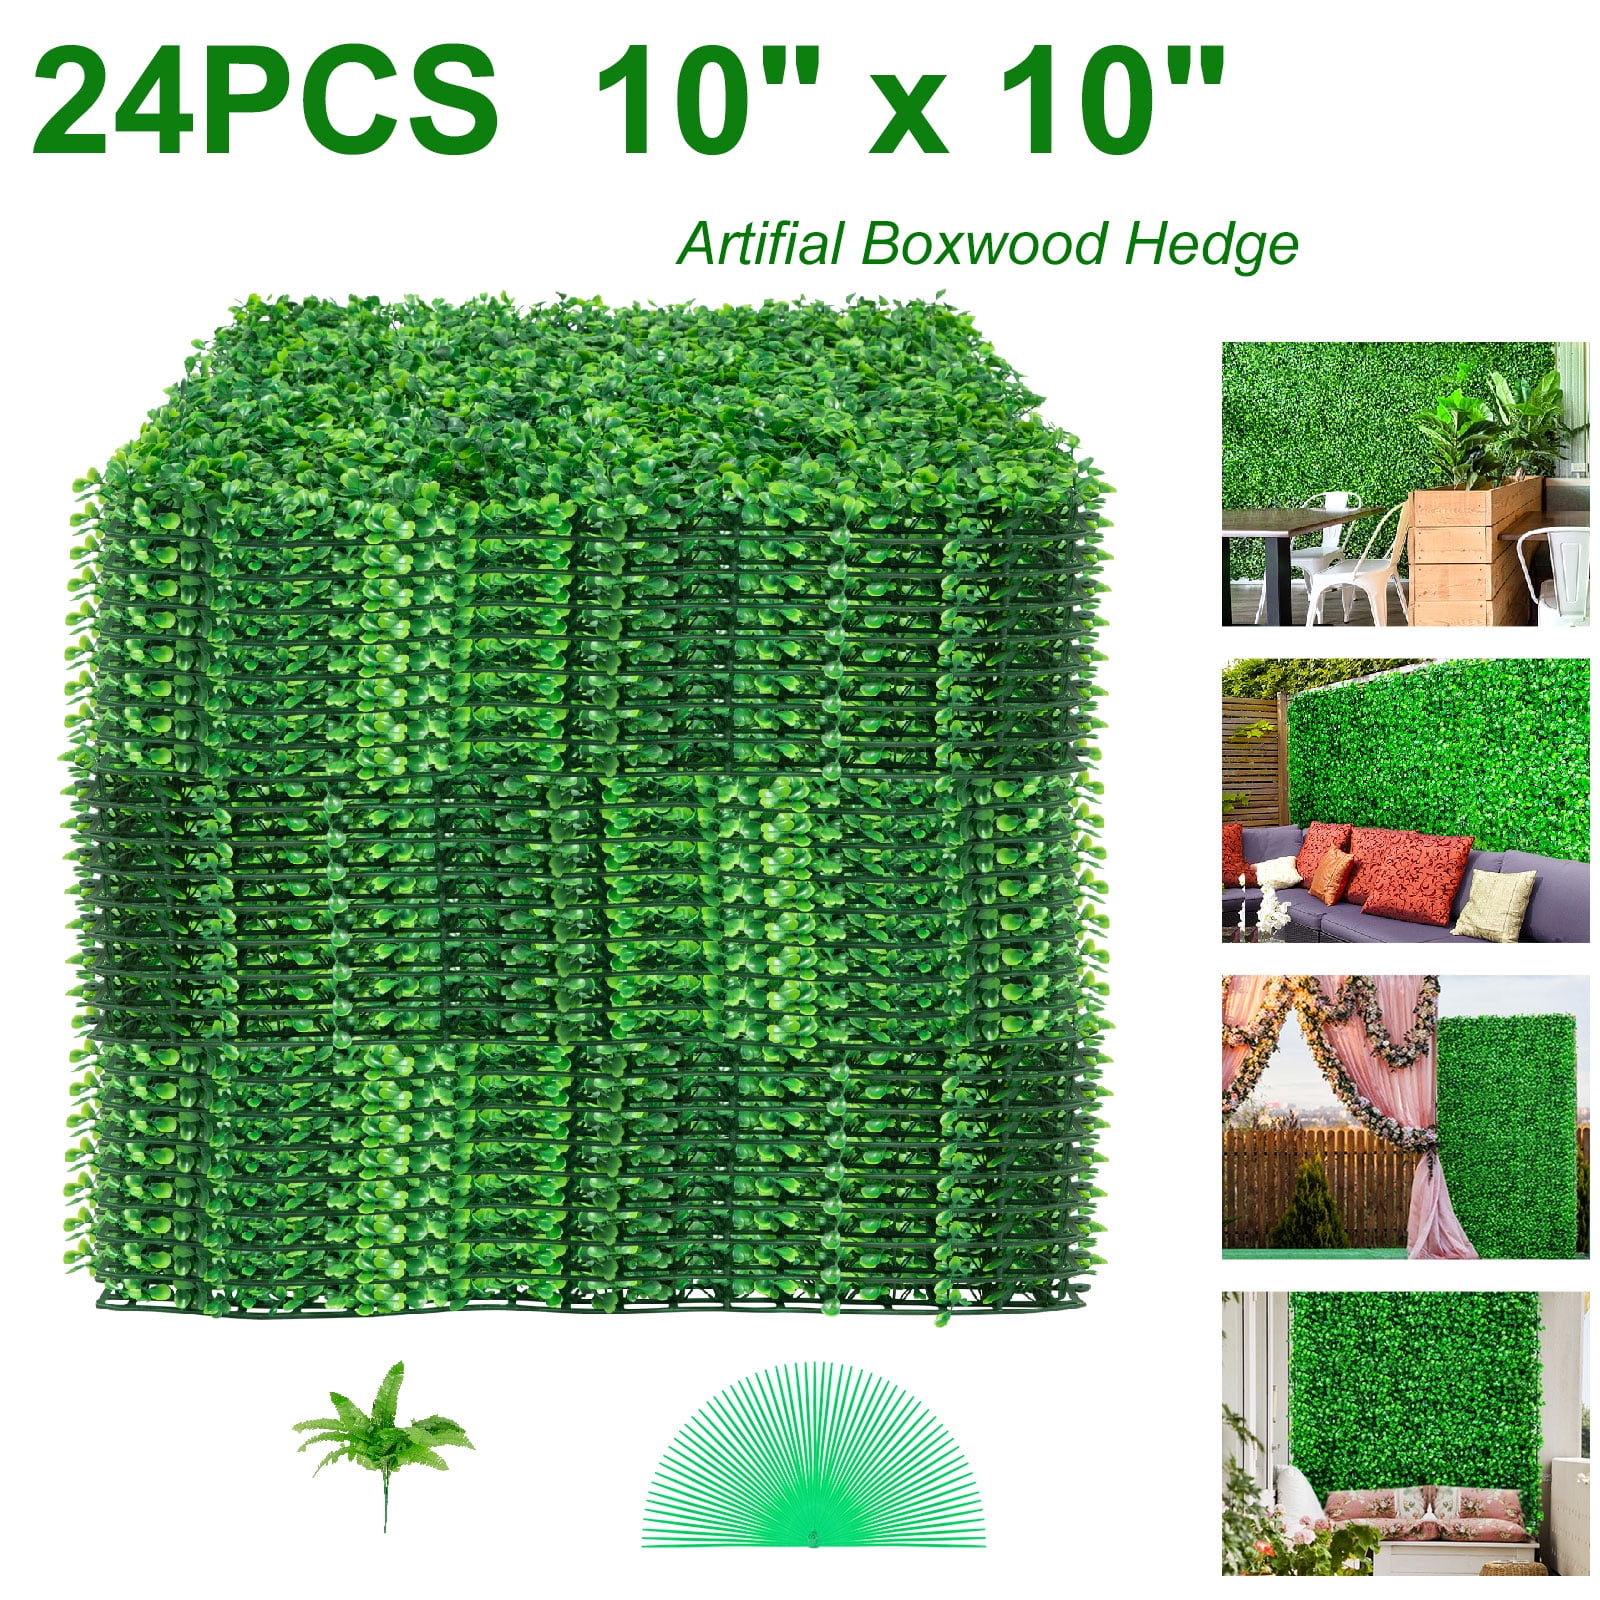 24PCS 10 x 10 Privacy Fence Screen for Outdoor Indoor Garden Backyard Wedding Backdrop Decor Topiary Hedge Plant w/UV Protection VEVOR Grass Wall Artificial Boxwood Panels 